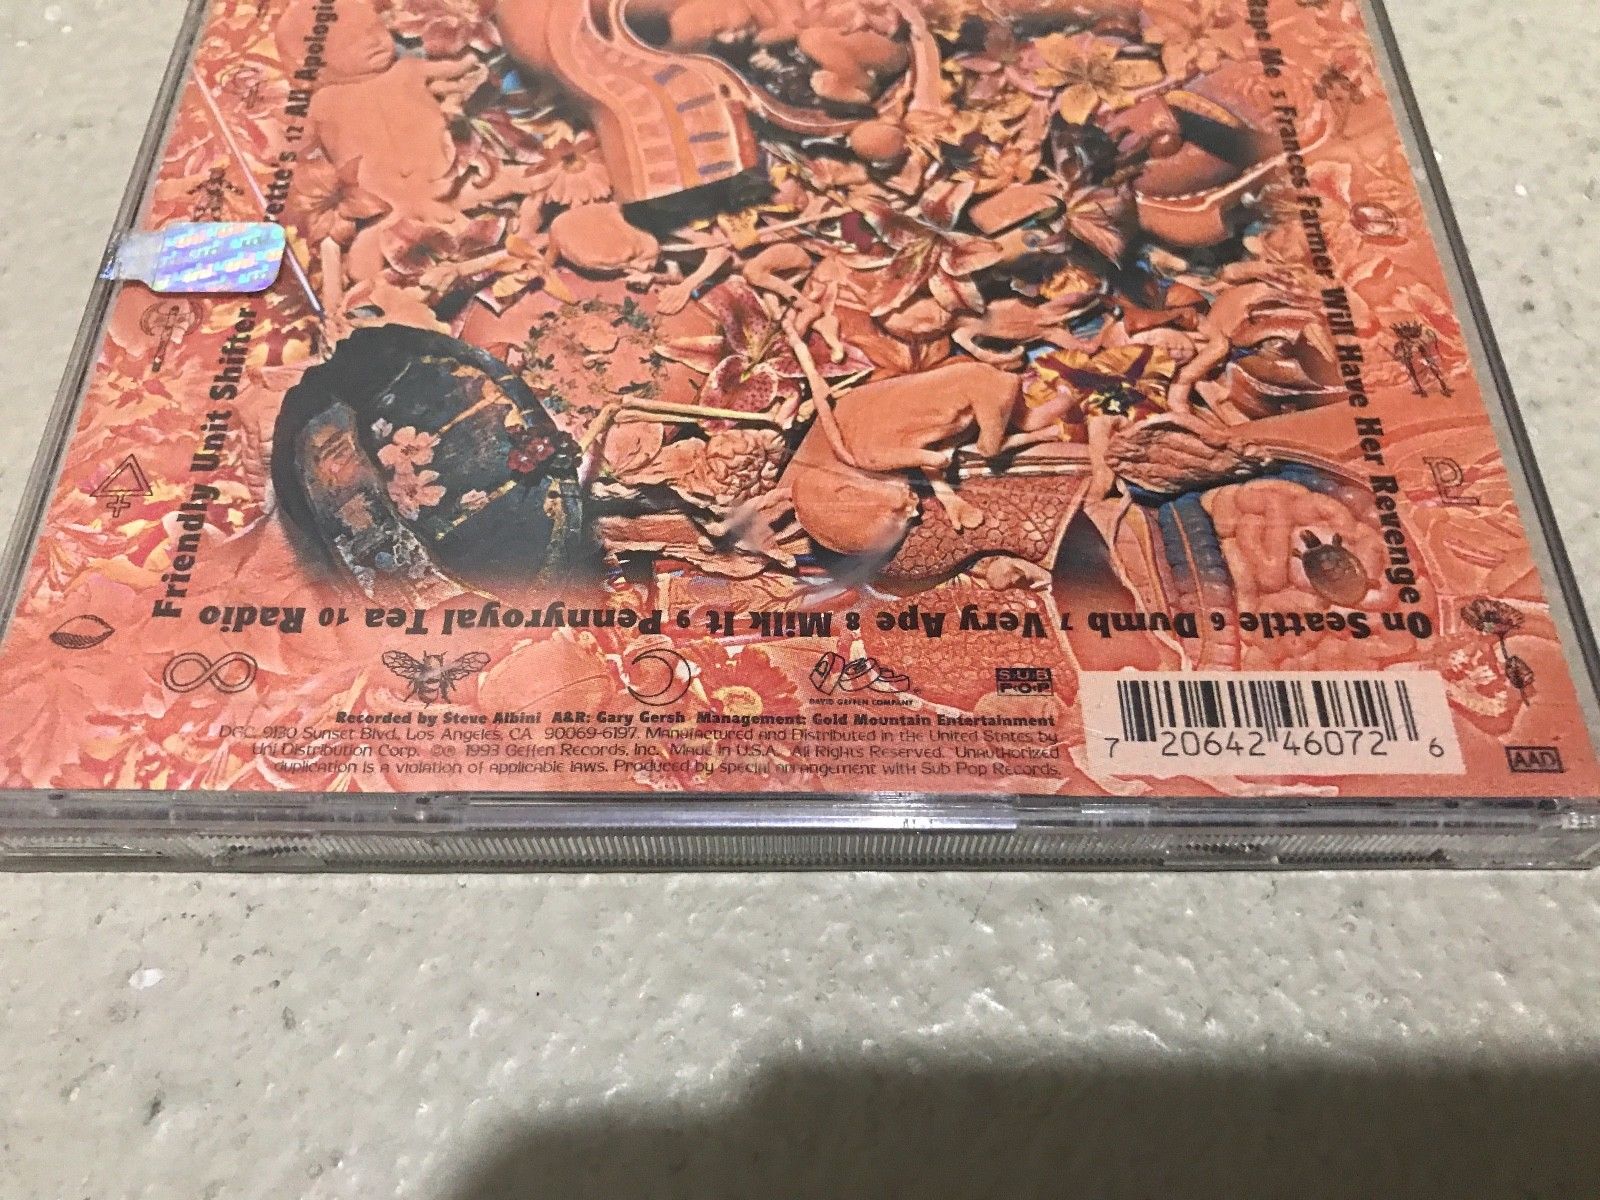 Help with identifying this In Utero CD? Is the heart hole punch anything  significant? : r/Nirvana